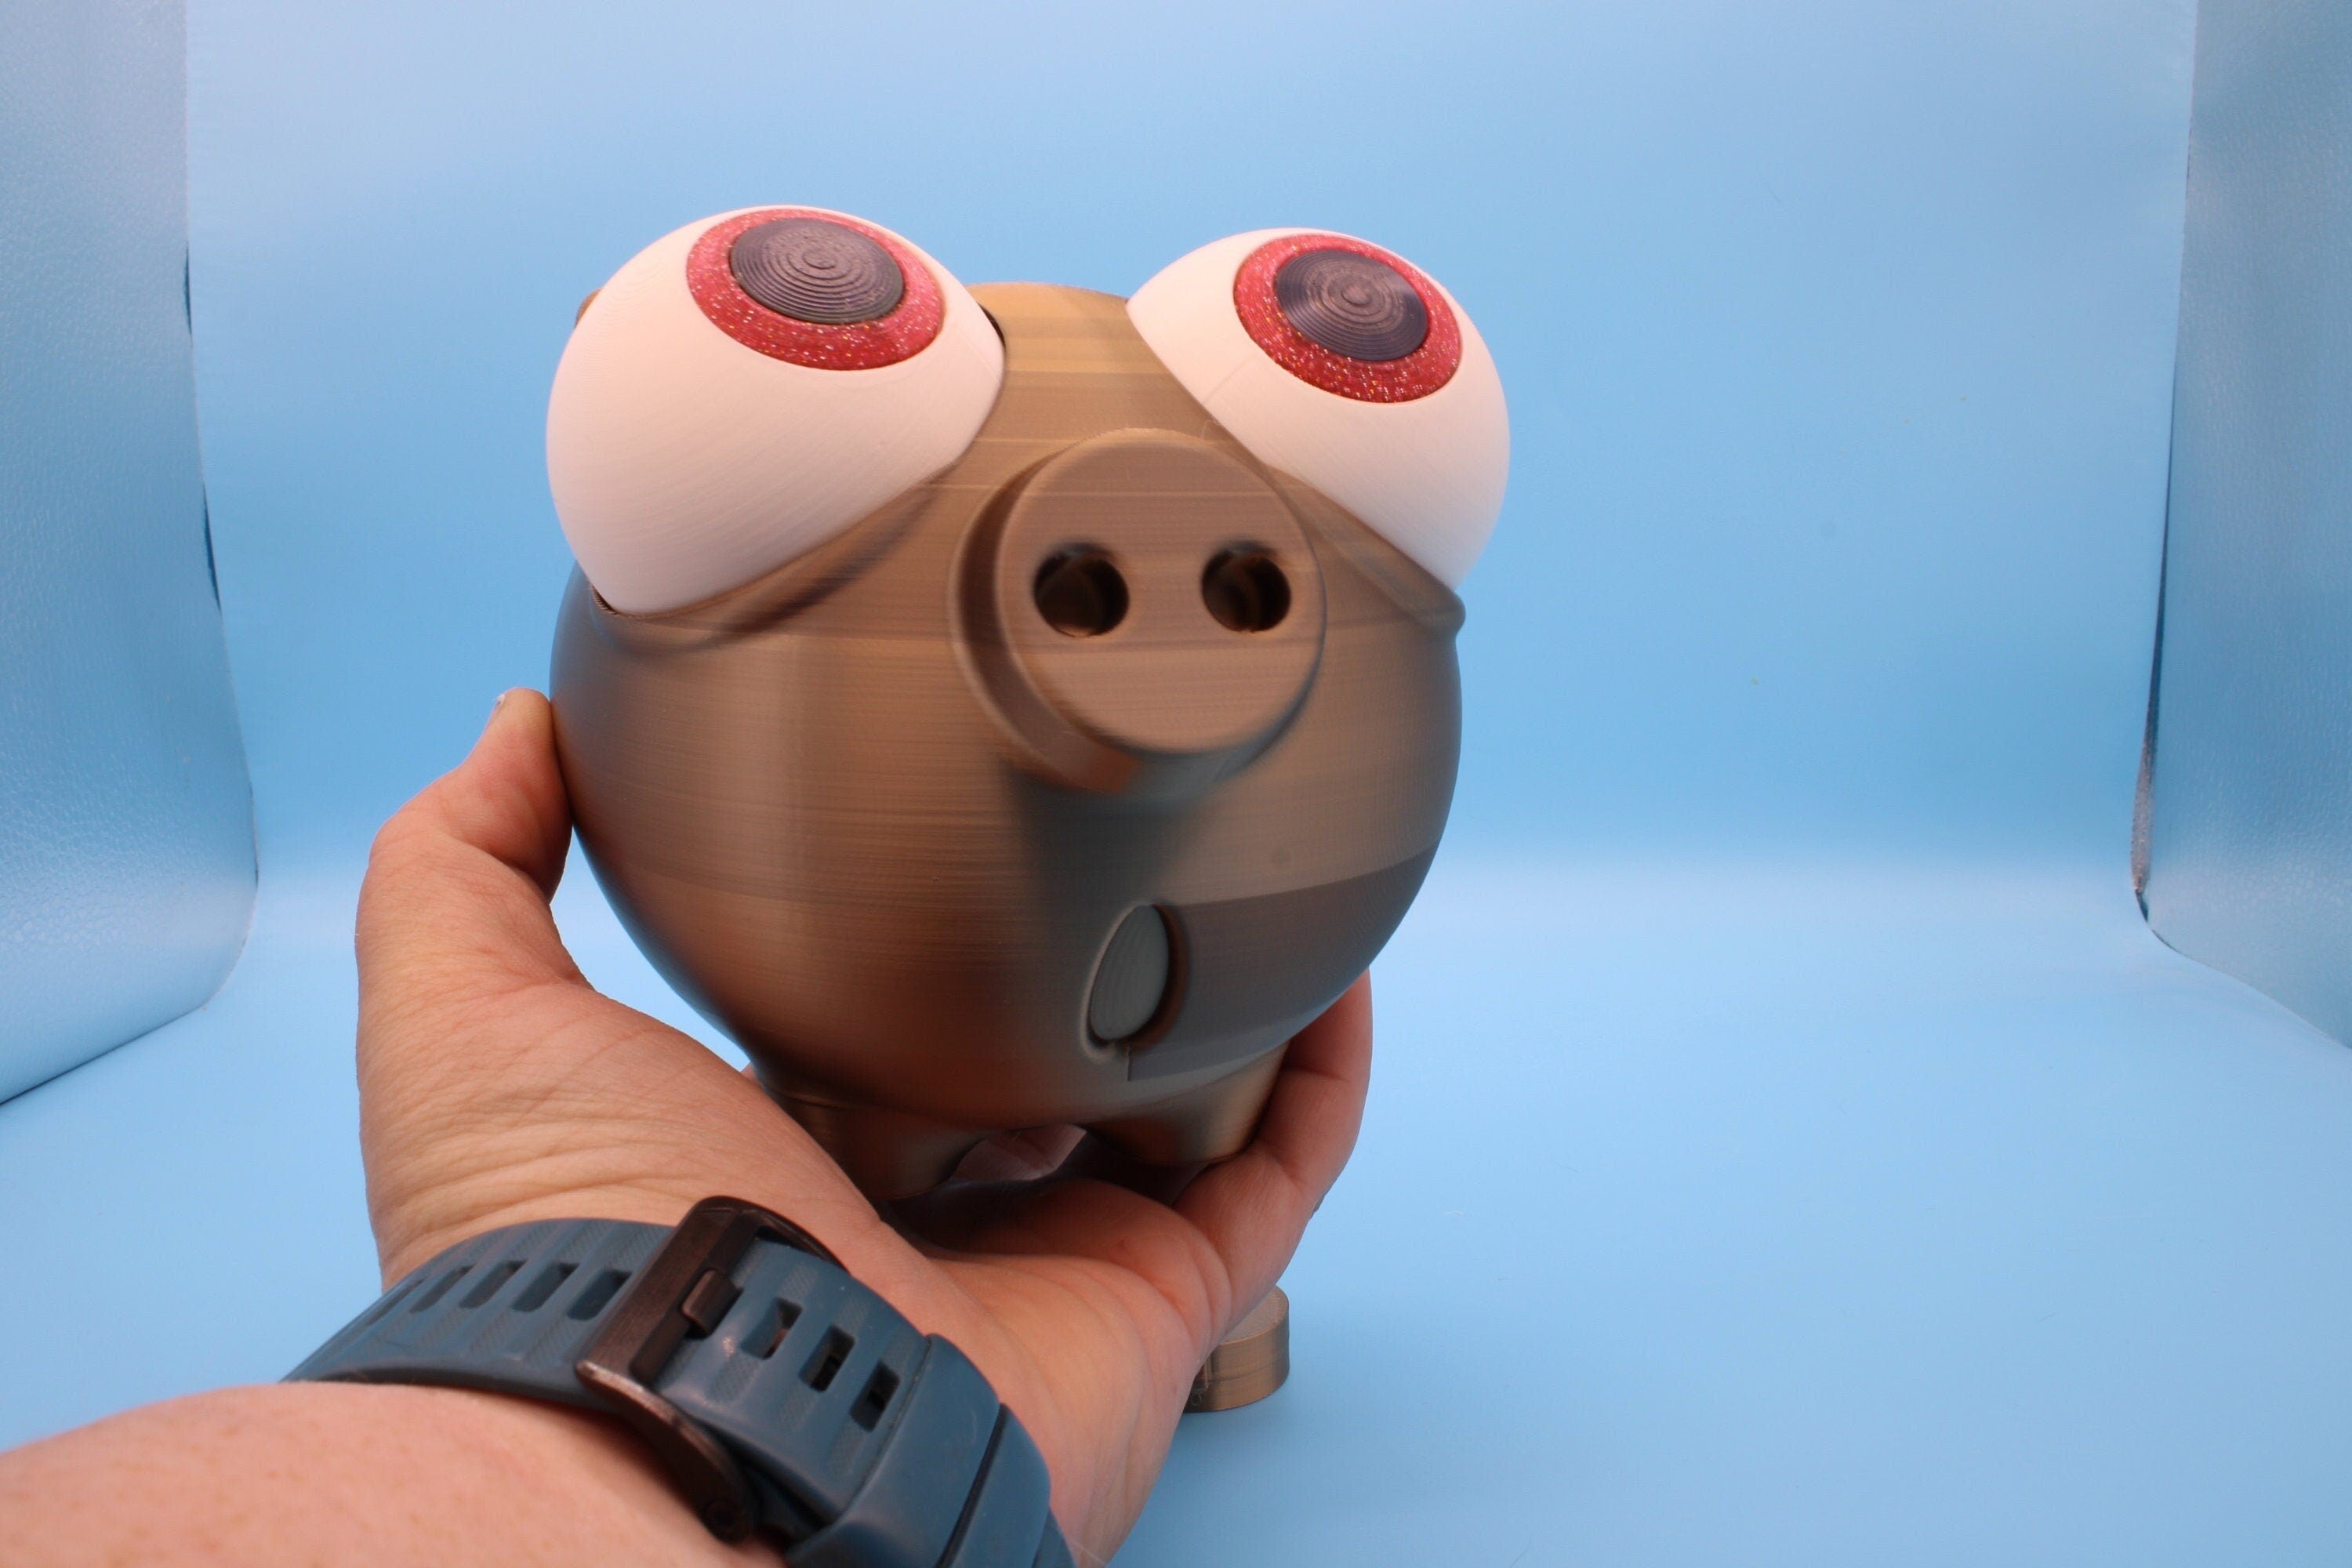 Coffee Gold Cute Piggy Bank | Eyes Do NOT Move | 3D Printed Holds Coins | Looks Amazing on display | Removable Turn Knob To Get Coins Out